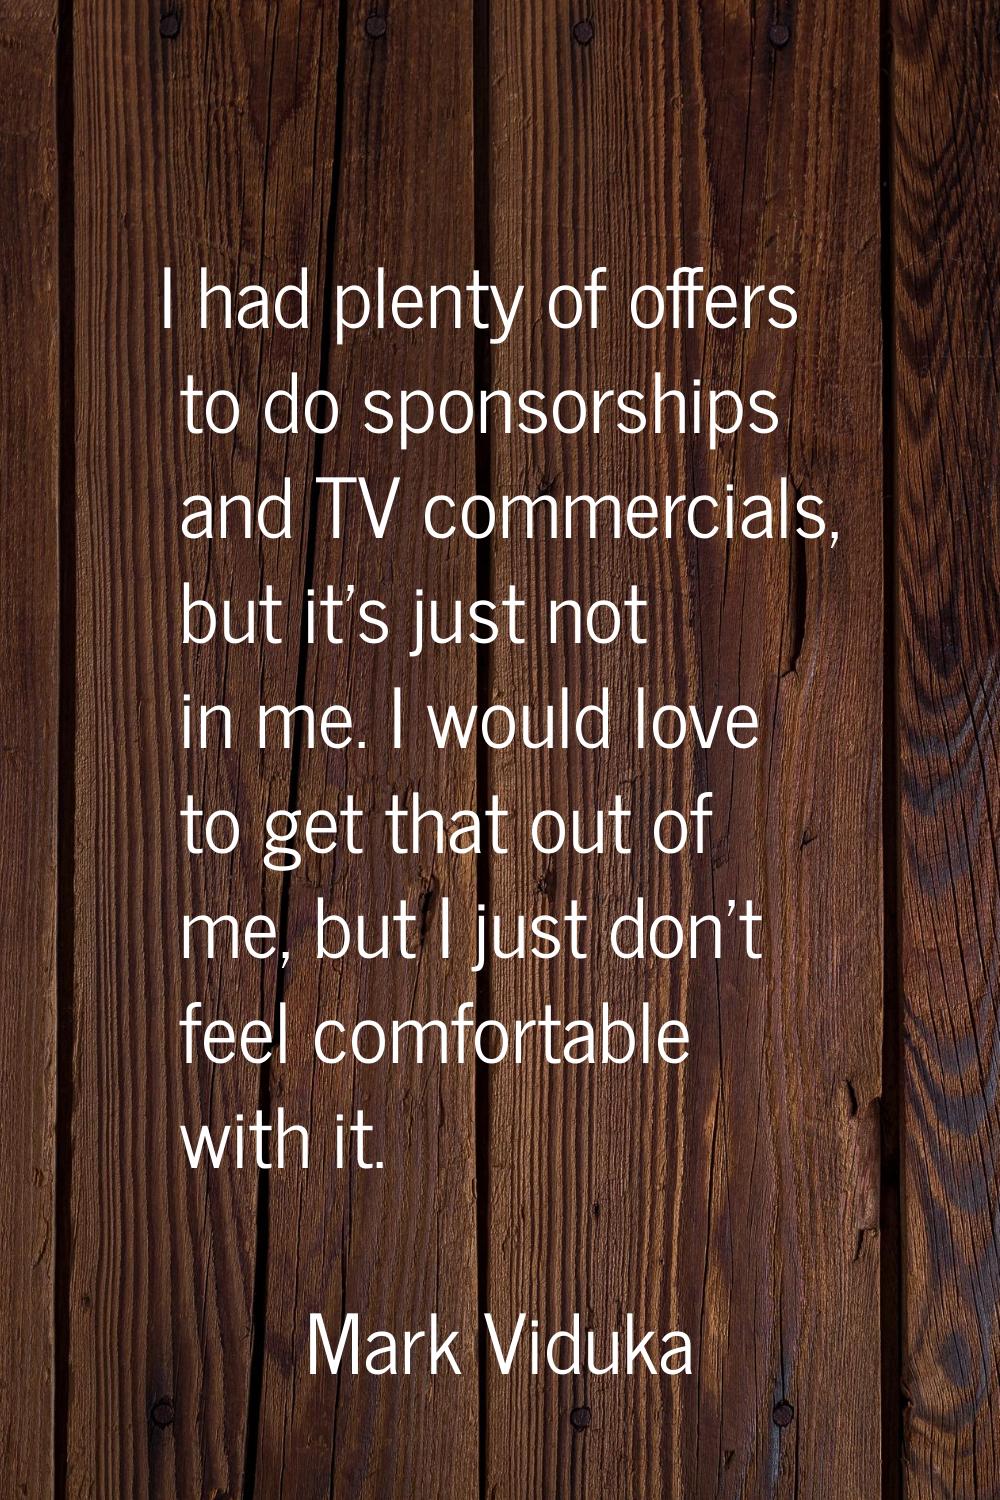 I had plenty of offers to do sponsorships and TV commercials, but it's just not in me. I would love